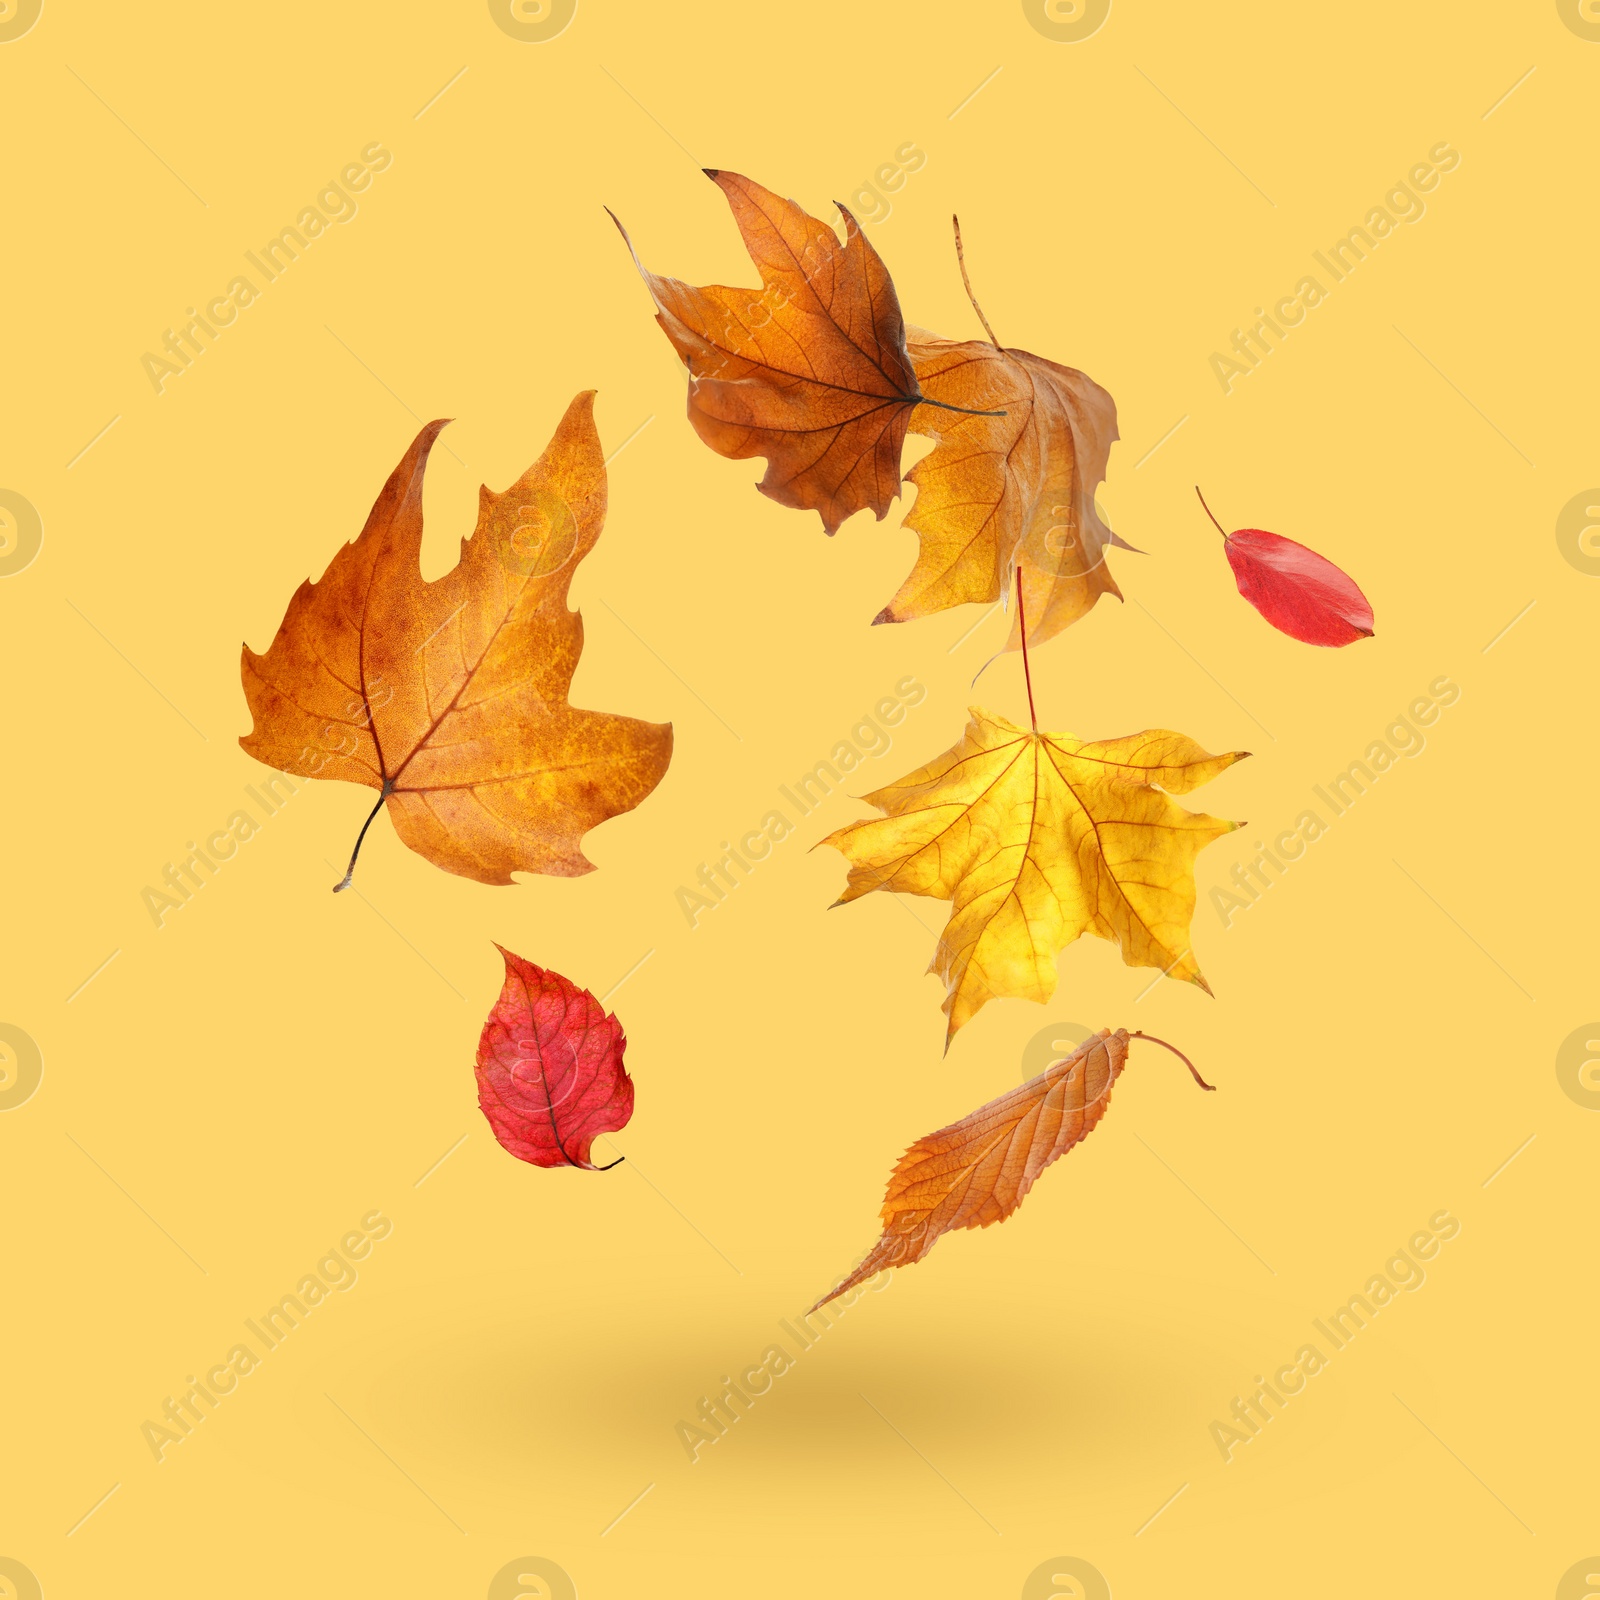 Image of Different autumn leaves falling on dusty golden background